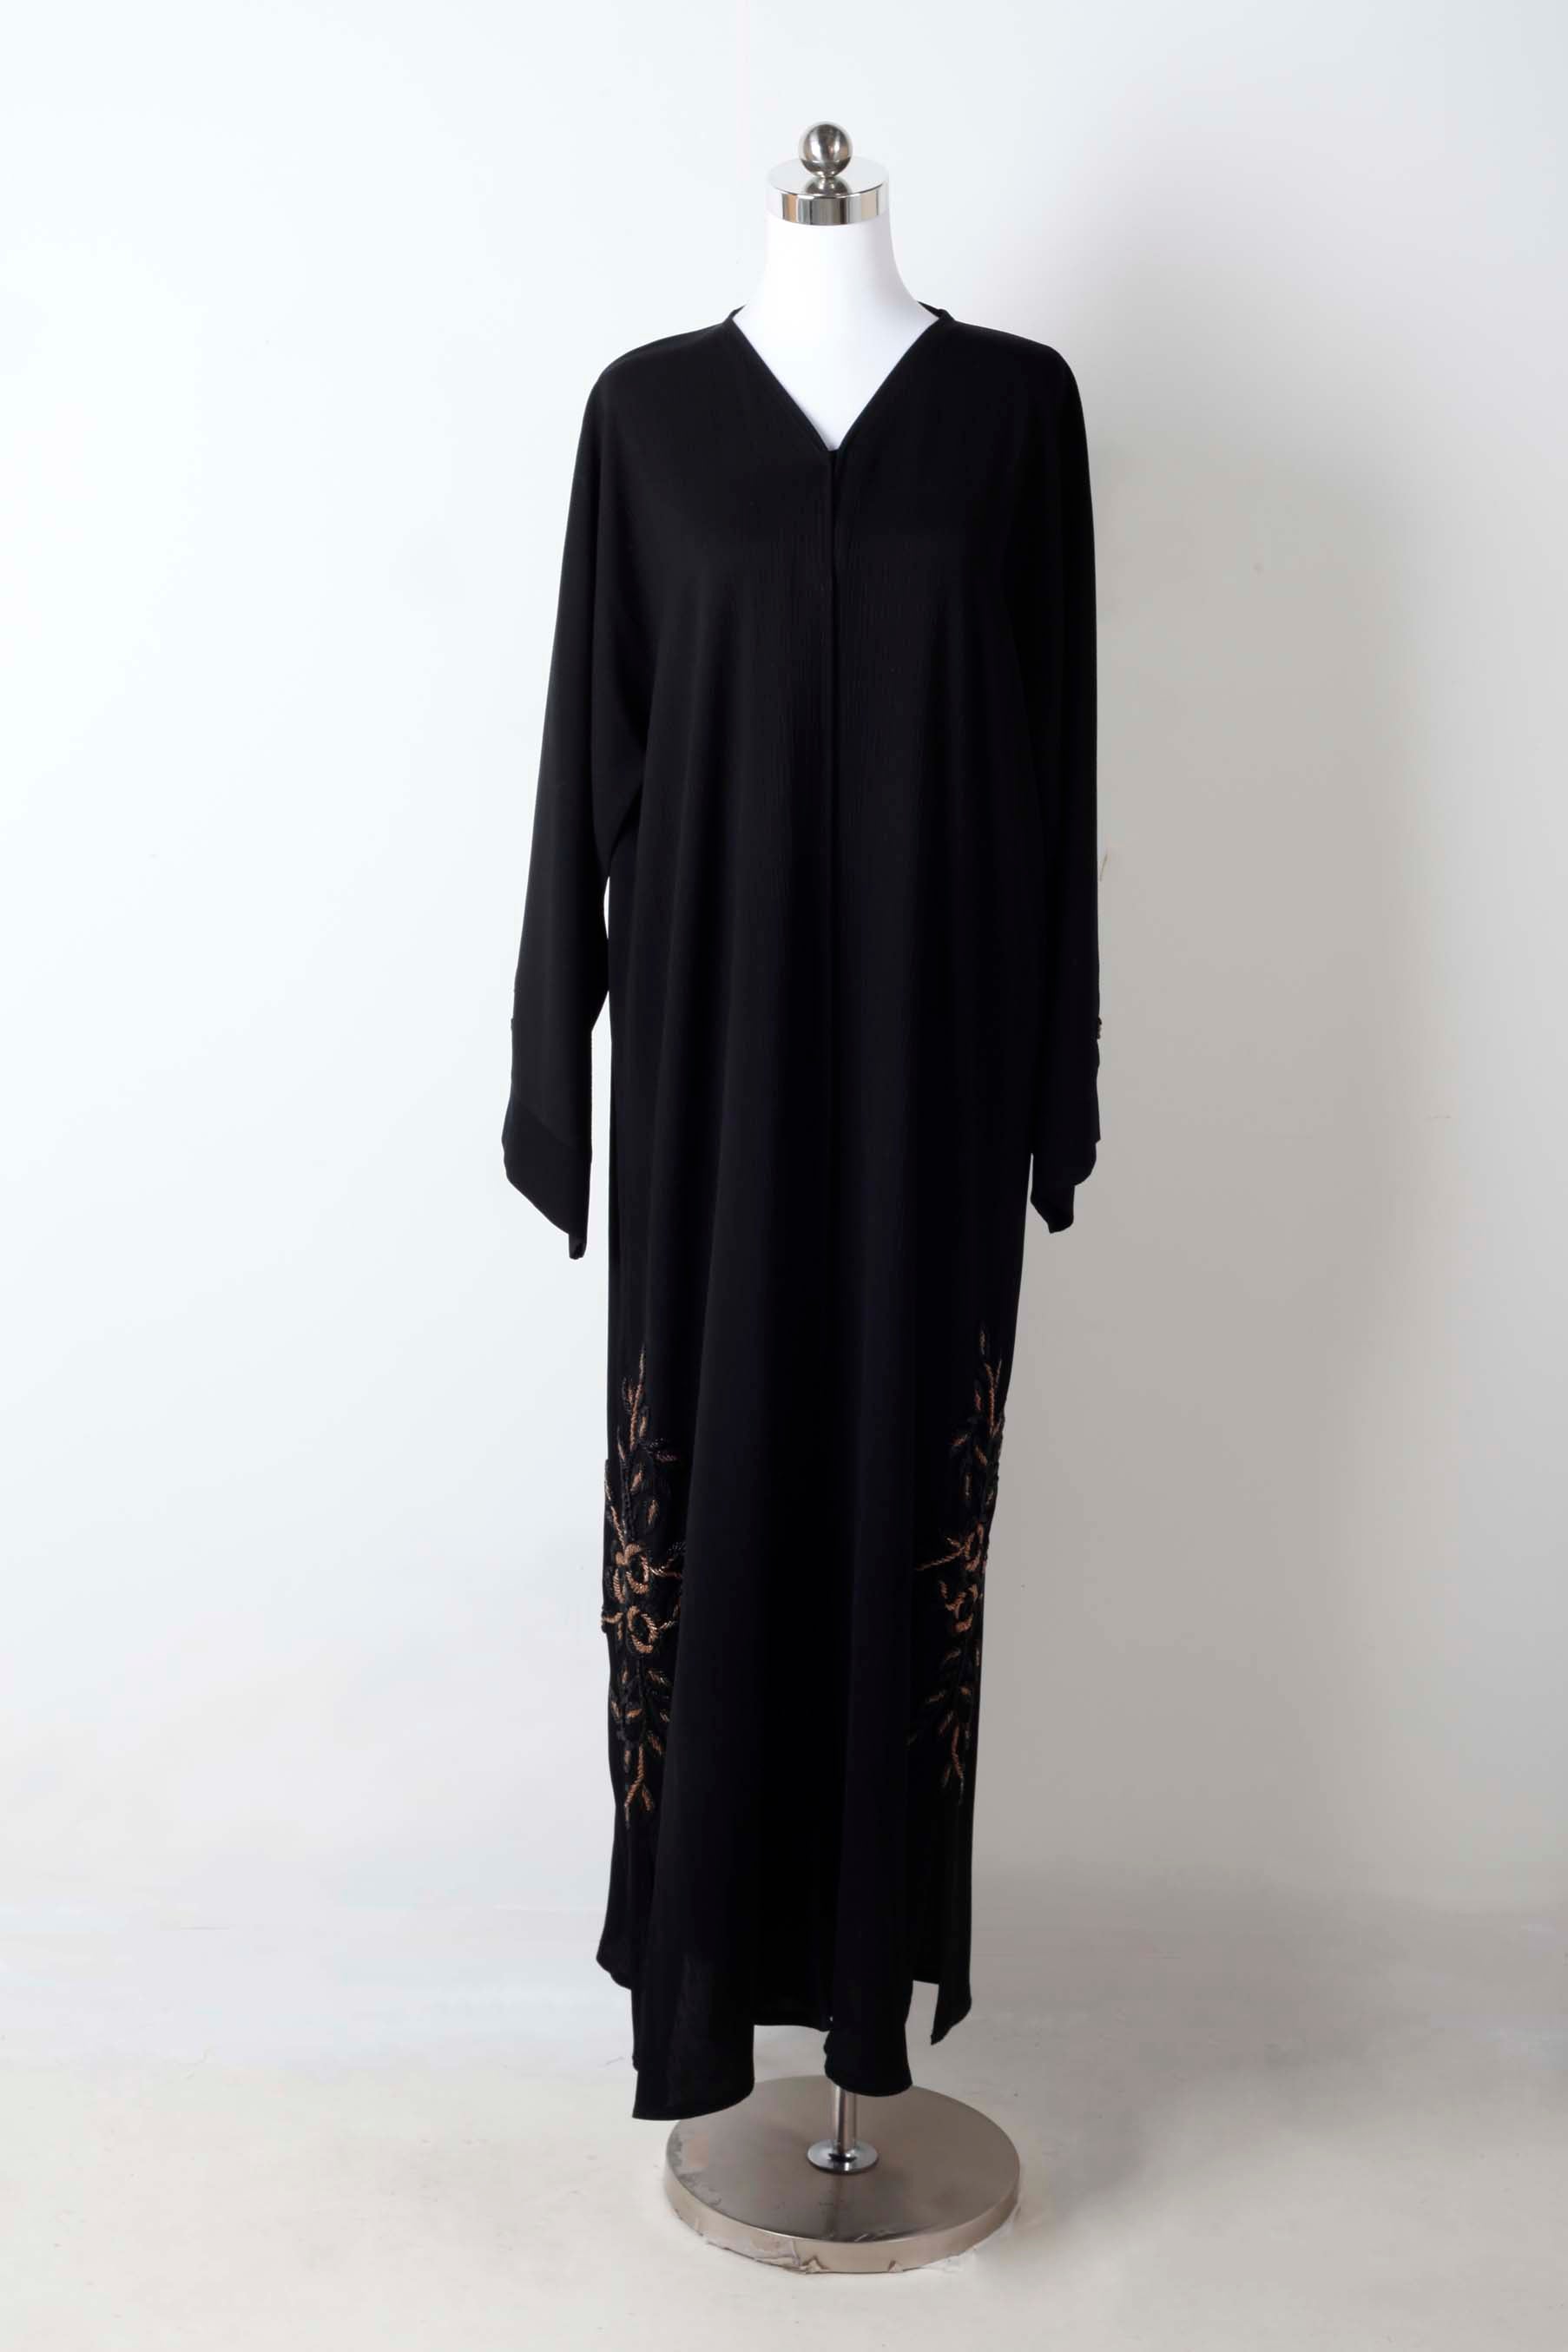 Black Abaya with Black and Gold Beaded Detailing